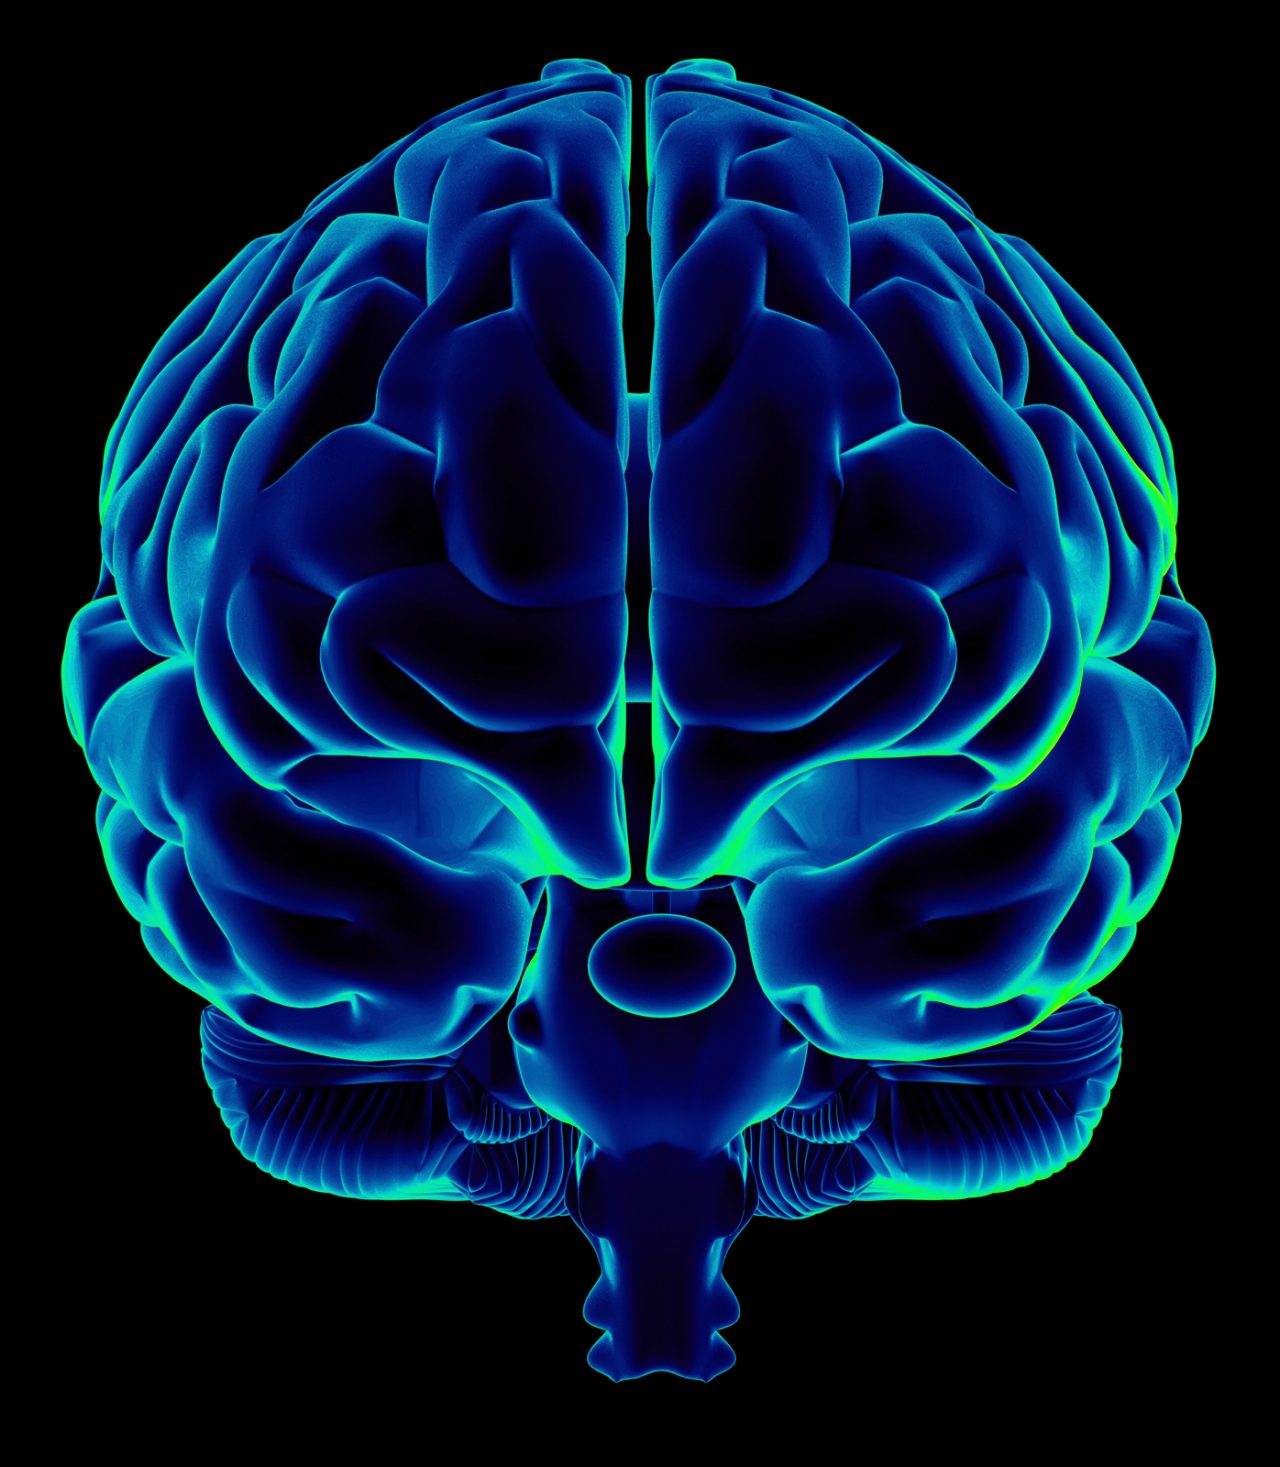 Human brain on front view and isolated on black background, great to be used in medicine works and health.